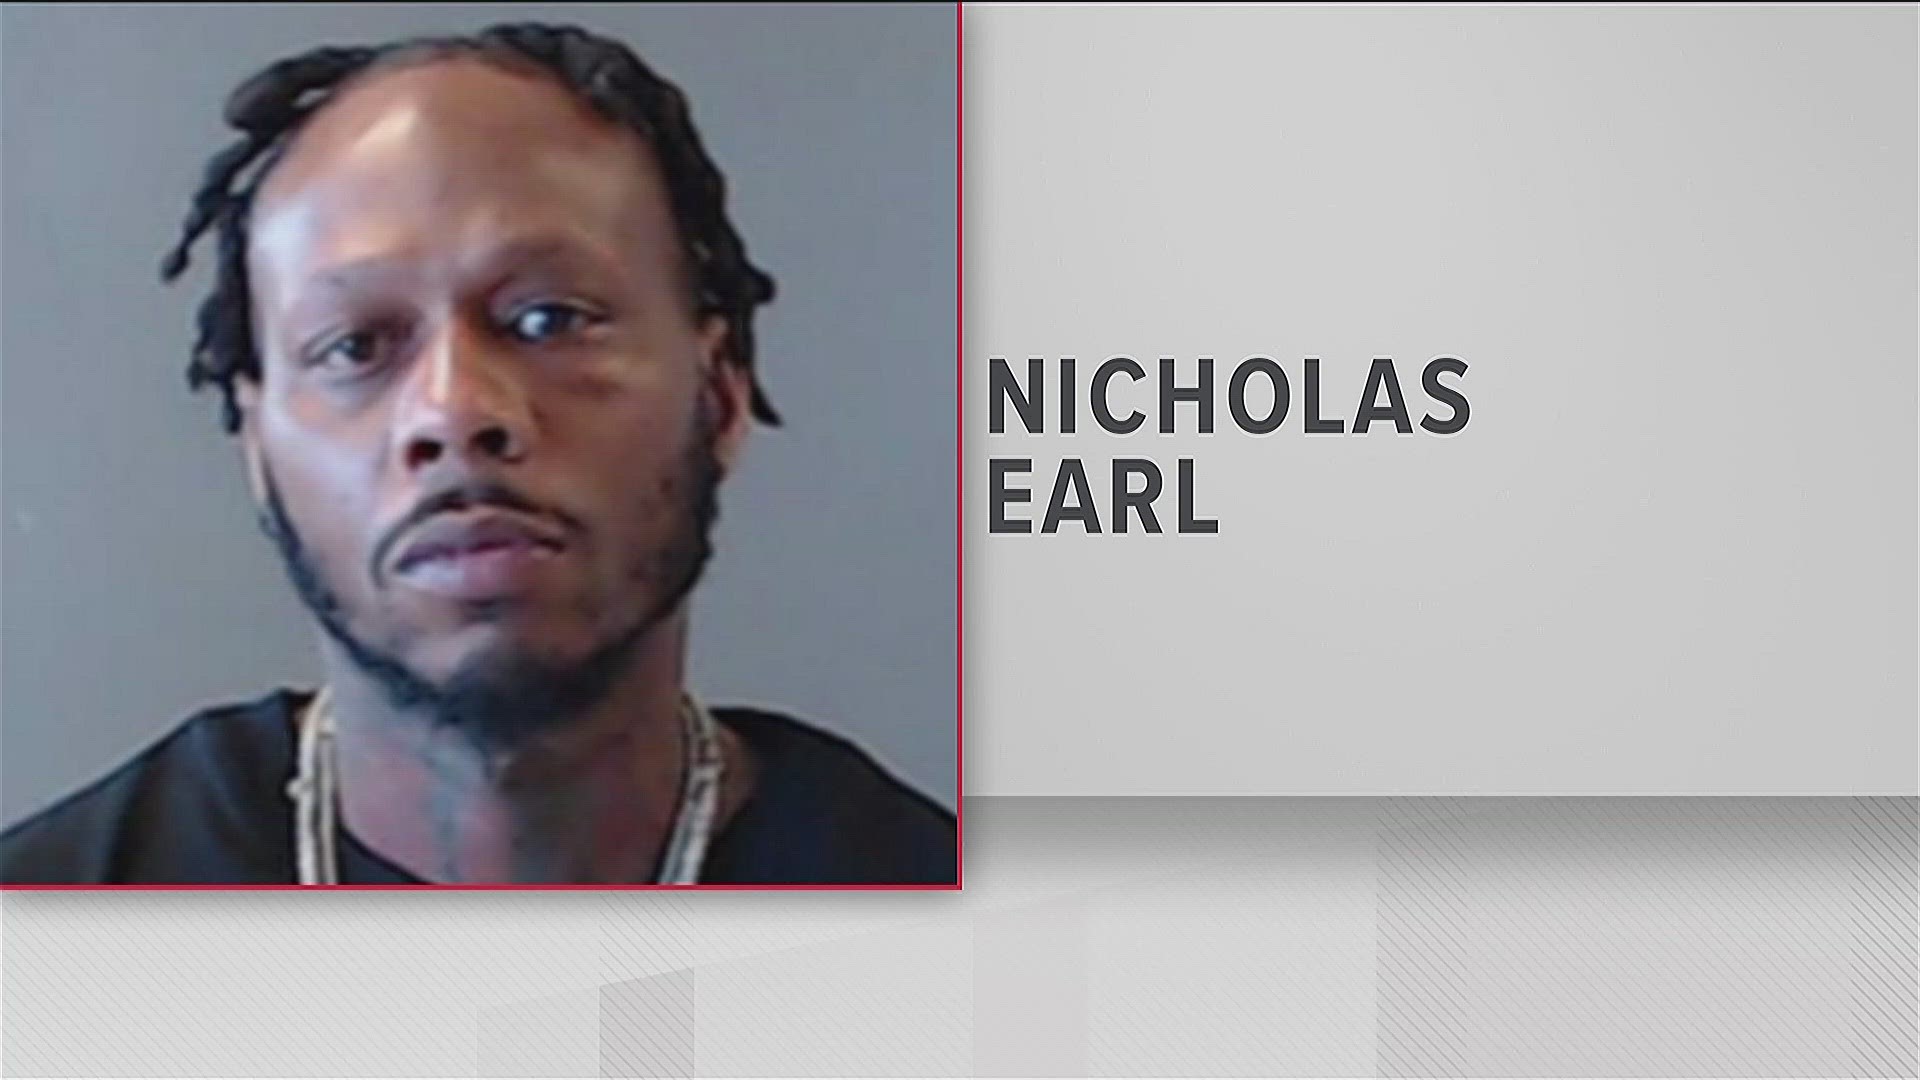 Nicholas Earl had been on the run since Friday after a sheriff's deputy was hurt in an initial chase.